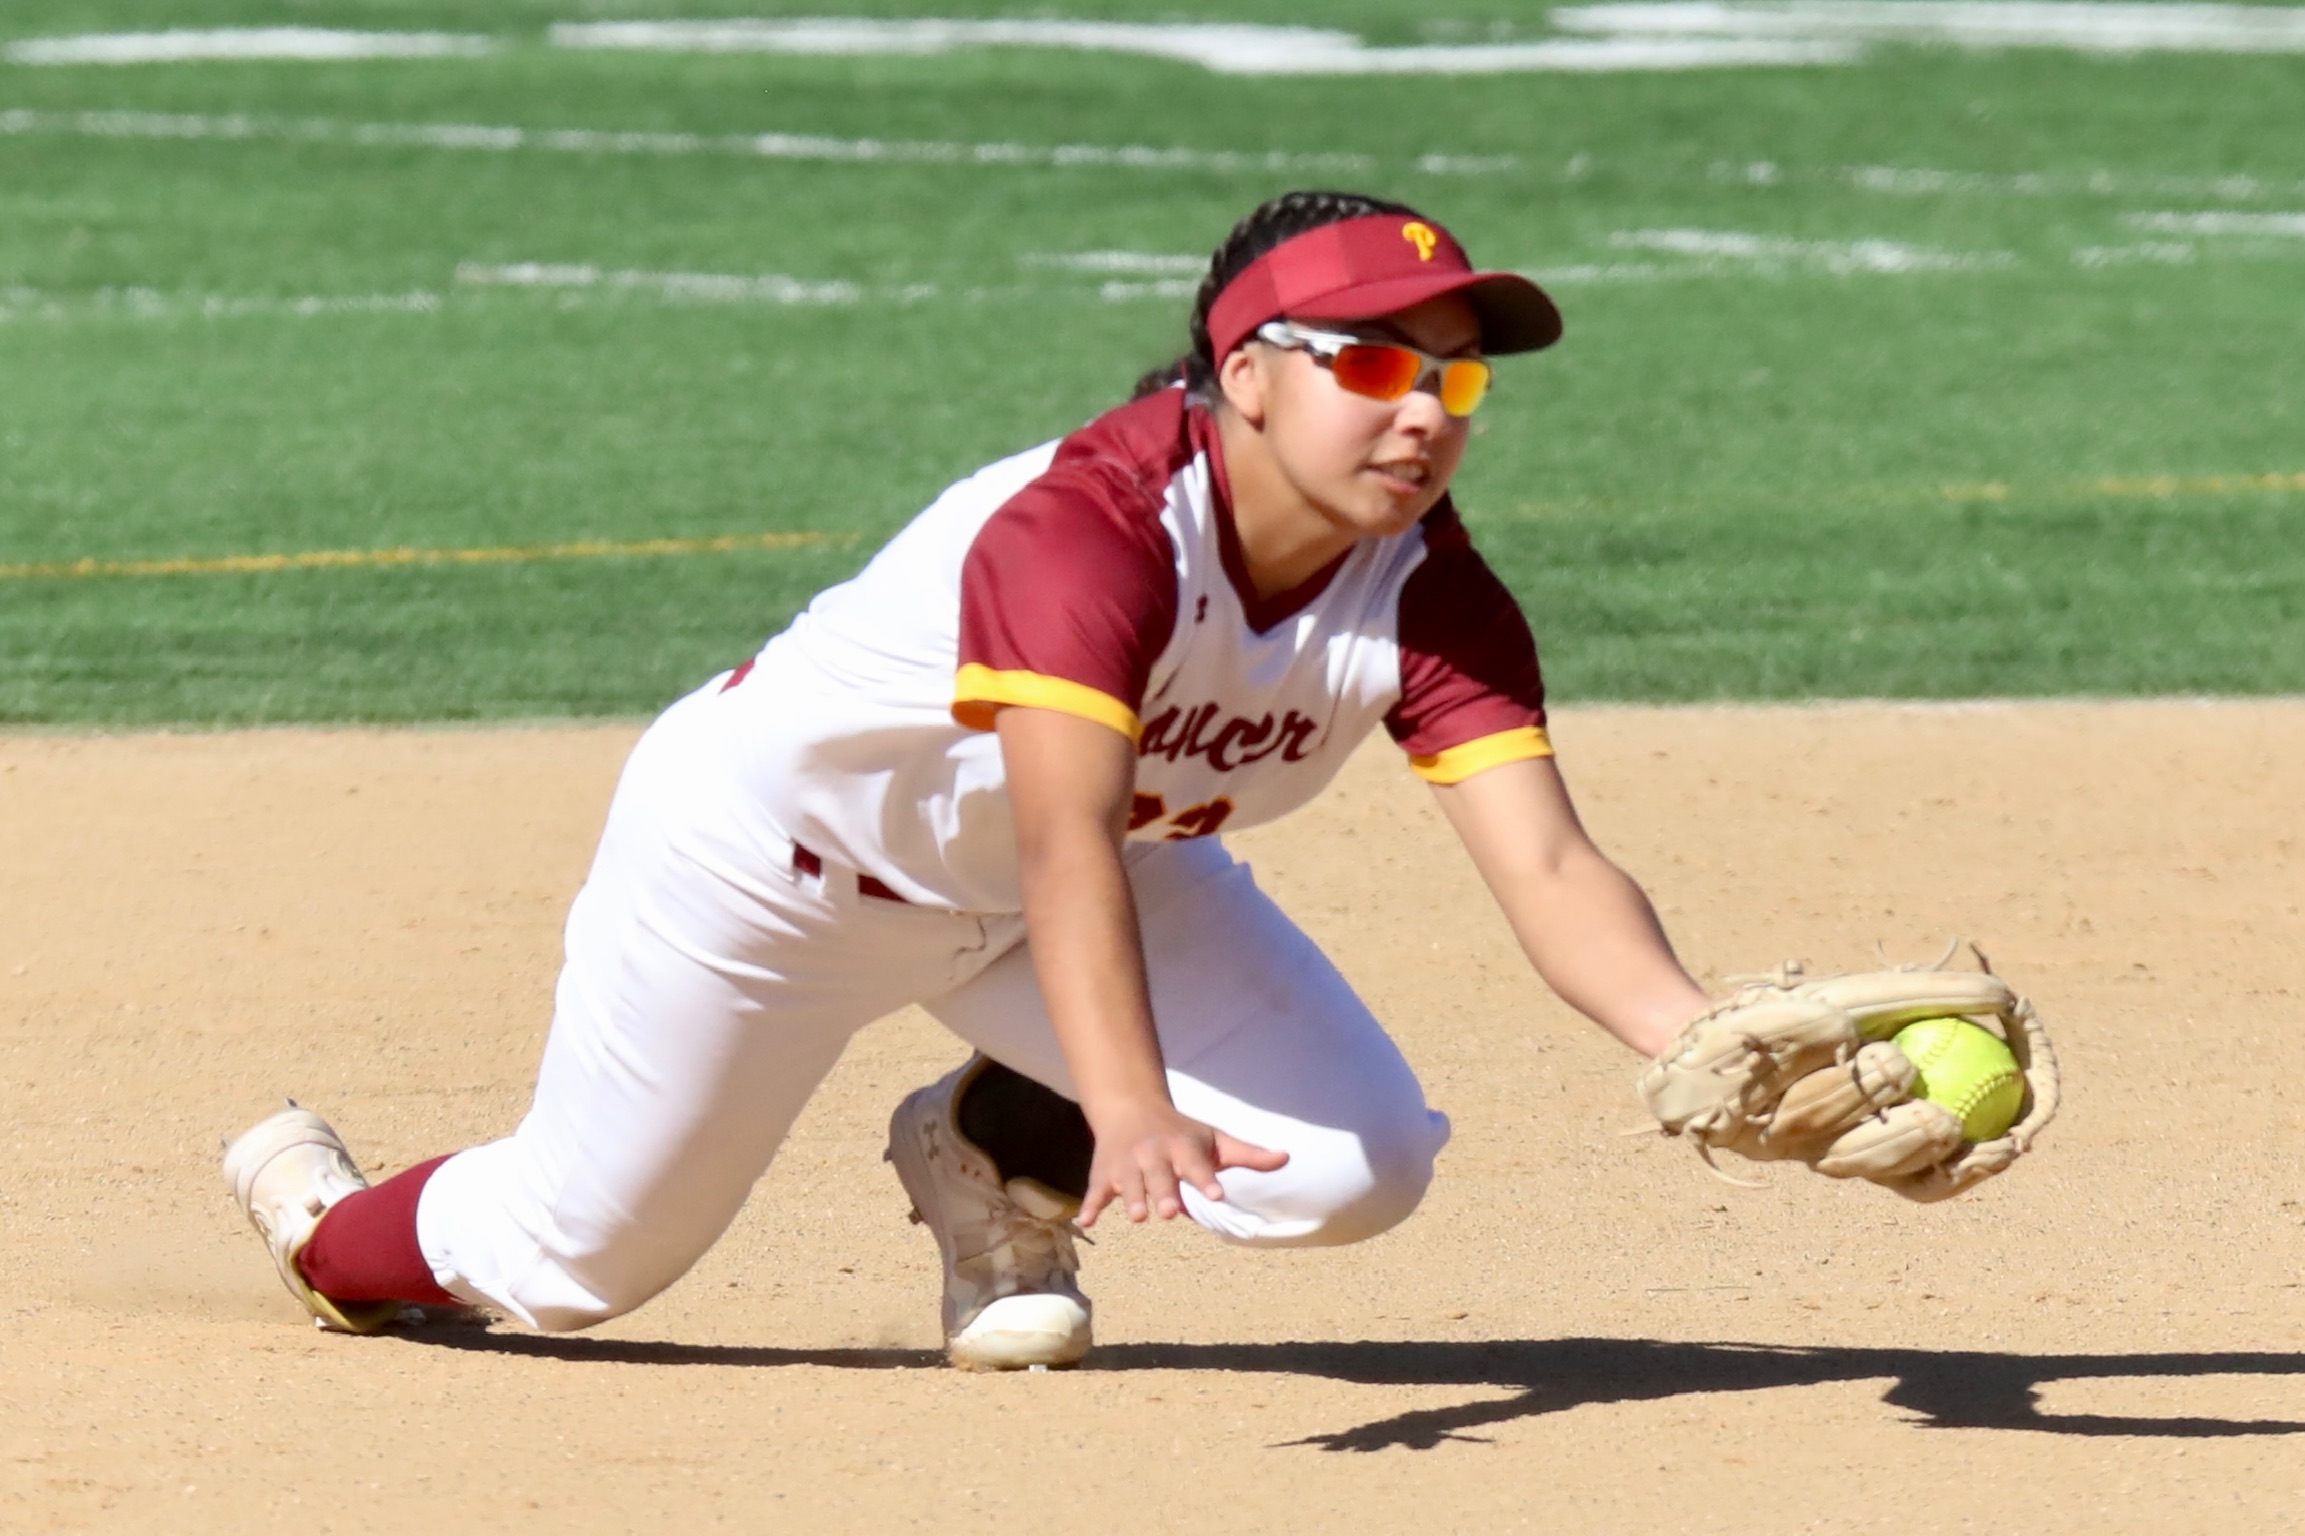 Gizelle Leyva has played strong defense for the Lancers as their shortstop this season.